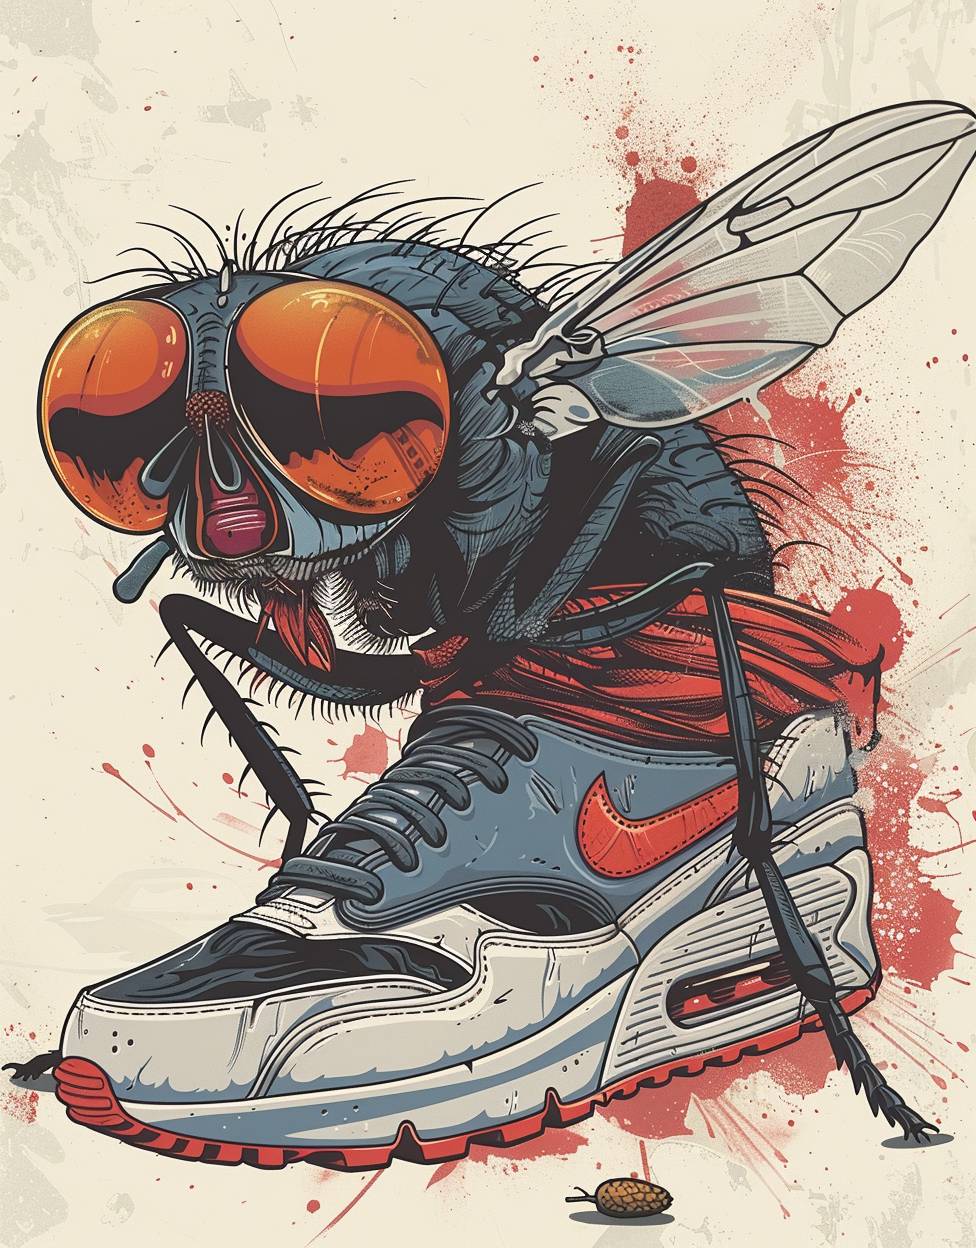 A red and black striped fly wearing sunglasses, holding a hemp joint in its hands and wearing Nike Air Max shoes in a vector style on a white background.